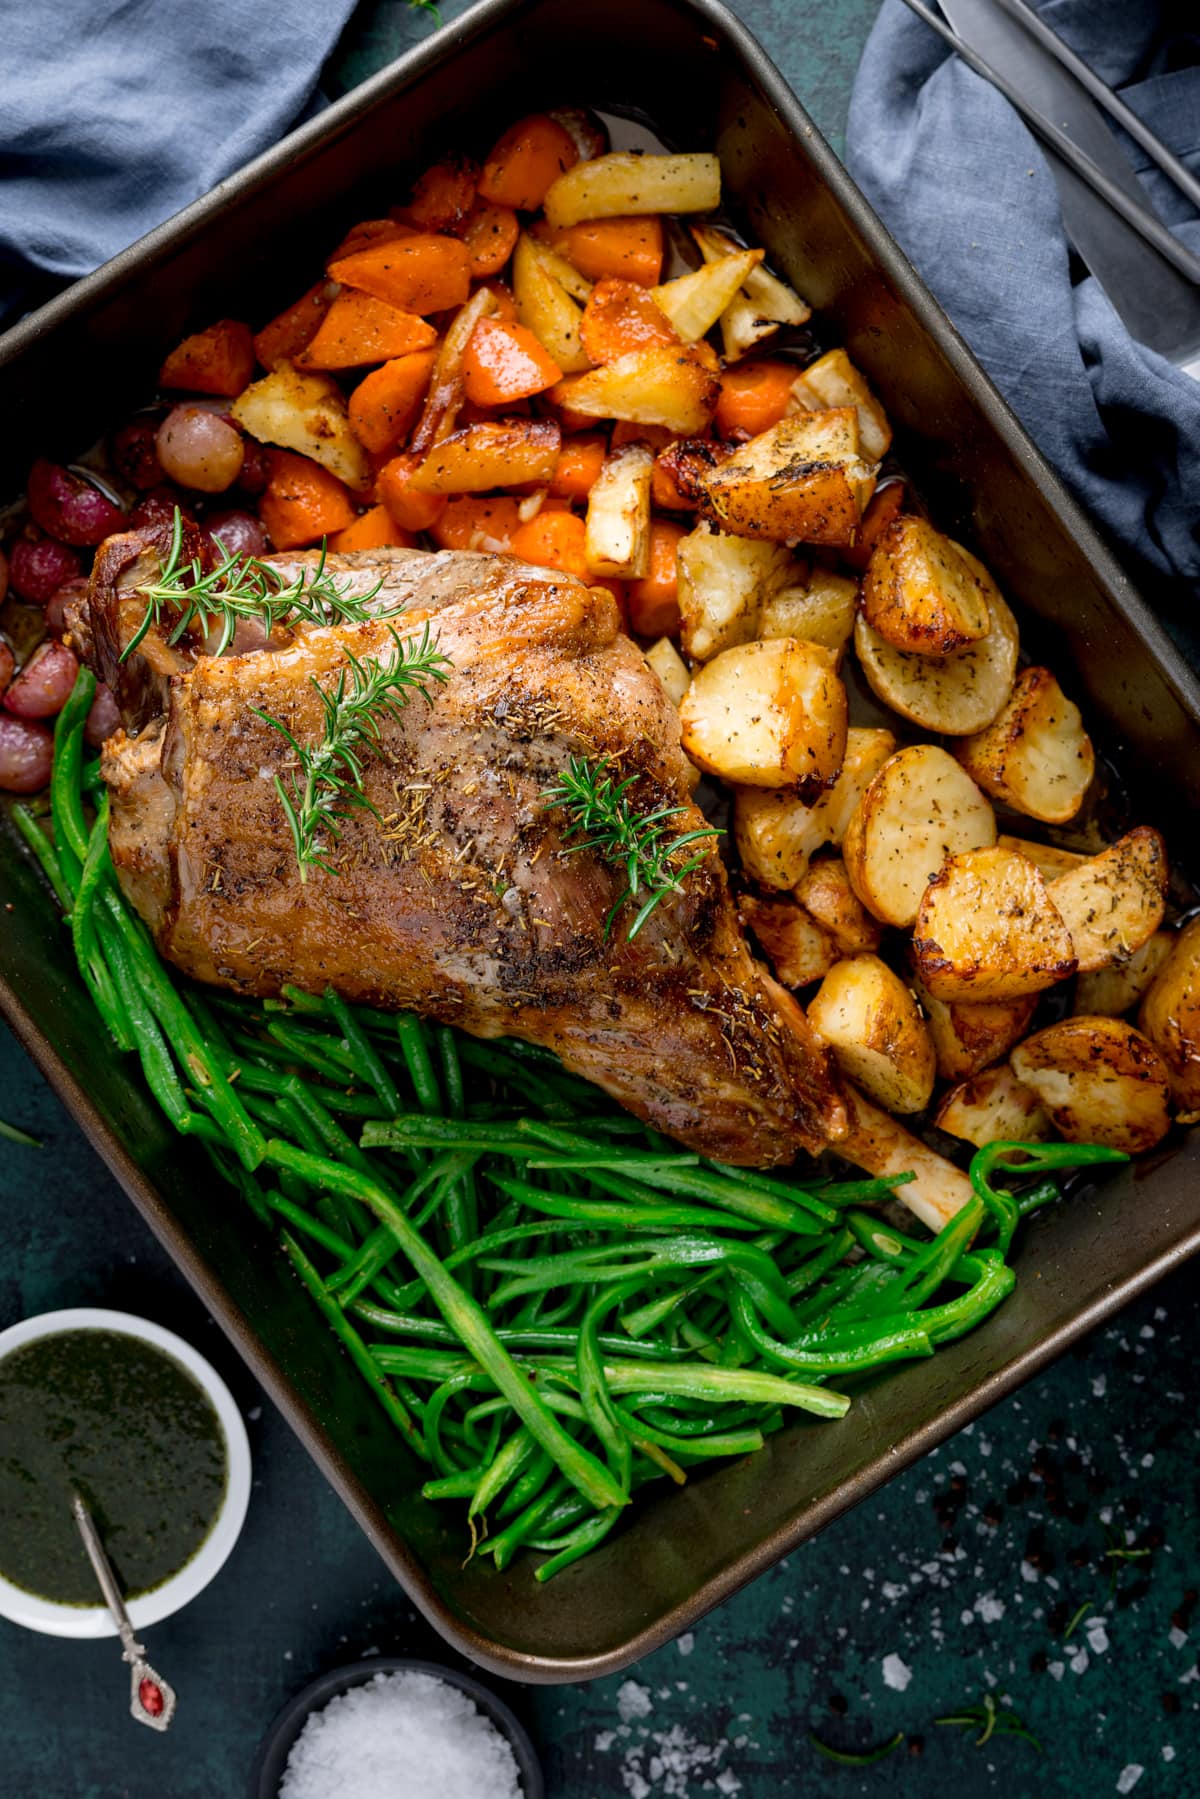 A large roasting pan with a roast leg of lamb with veggies and potatoes in there too garnished with a couple of sprigs of fresh rosemary.